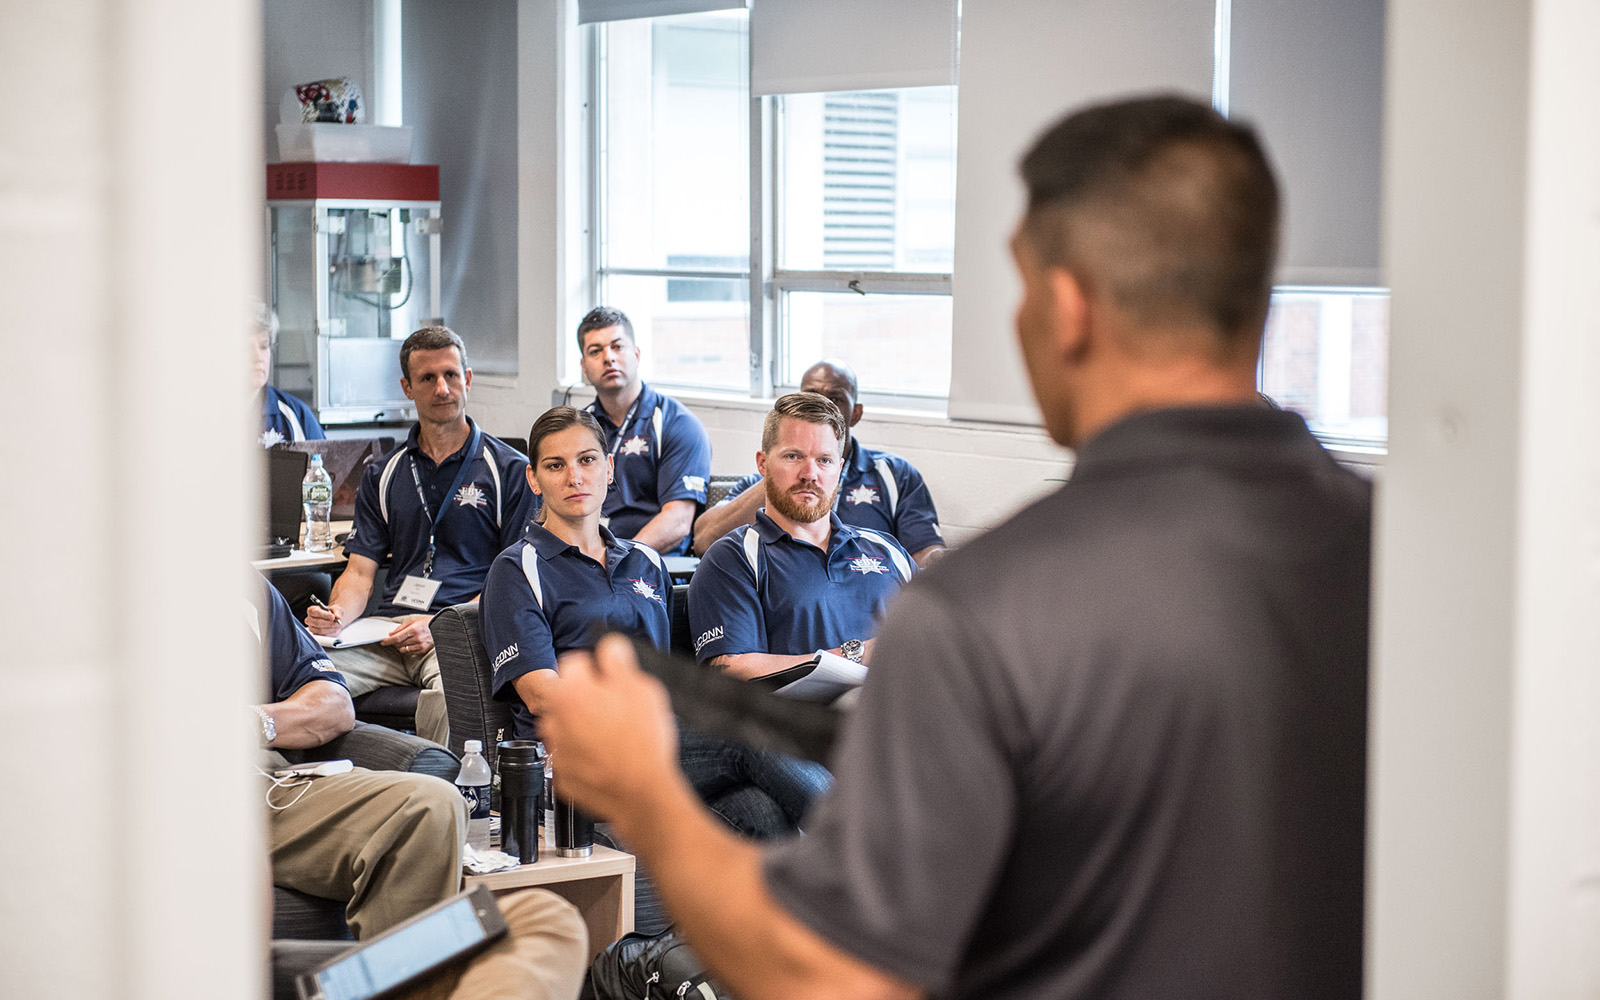 The EBV hosts up to 25 U.S. military veterans during an annual, 10-day program that prepares them to become entrepreneurs. Pictured above, EBV Class of 2017 veterans in class. (Nathan Oldham/UConn School of Business)